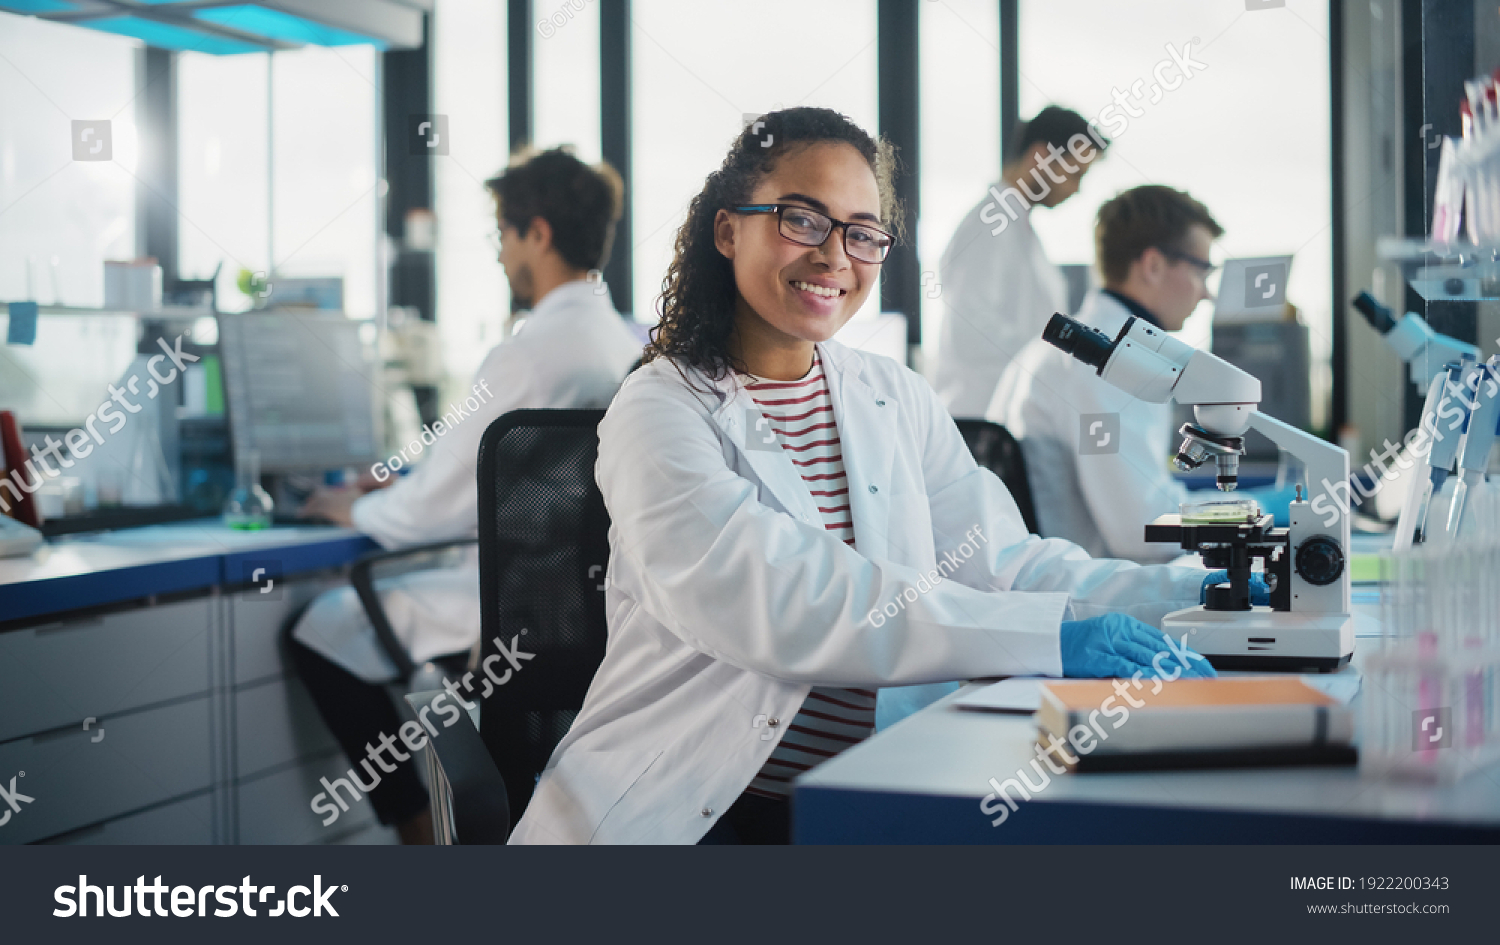 Medical Science Laboratory: Beautiful Black Scientist is Using Microscope, Looking at Camera and Smiling Charmingly. Young Biotechnology Science Specialist, Using Technologically Advanced Equipment. #1922200343